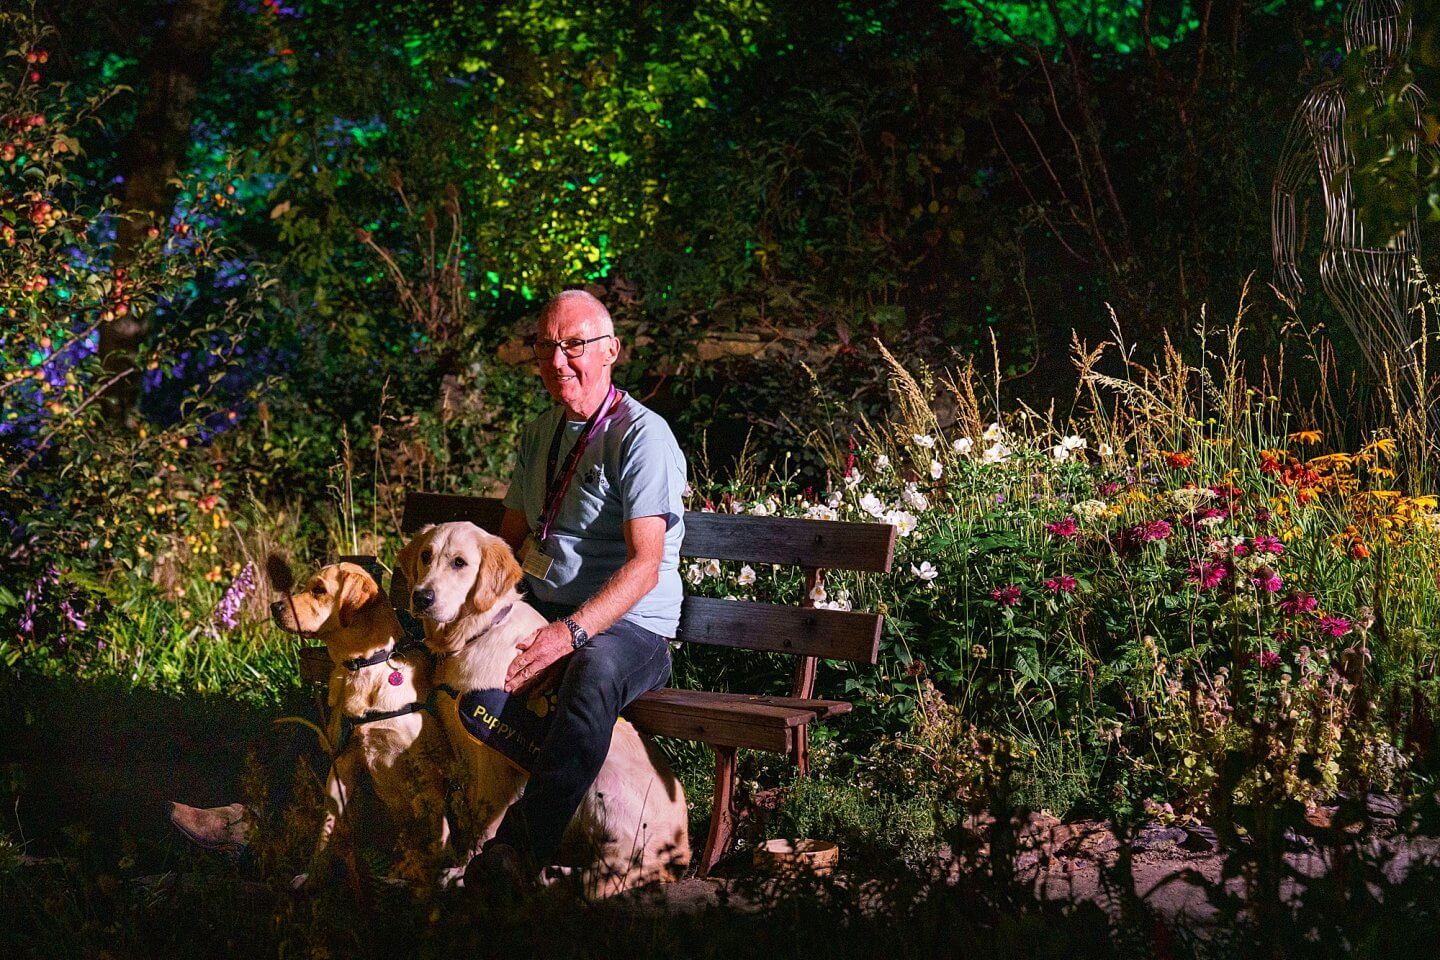 Guide Dogs 90th Anniversary Garden in the Artisan Gardens of Chelsea Flower Show 2021 as seen after dark